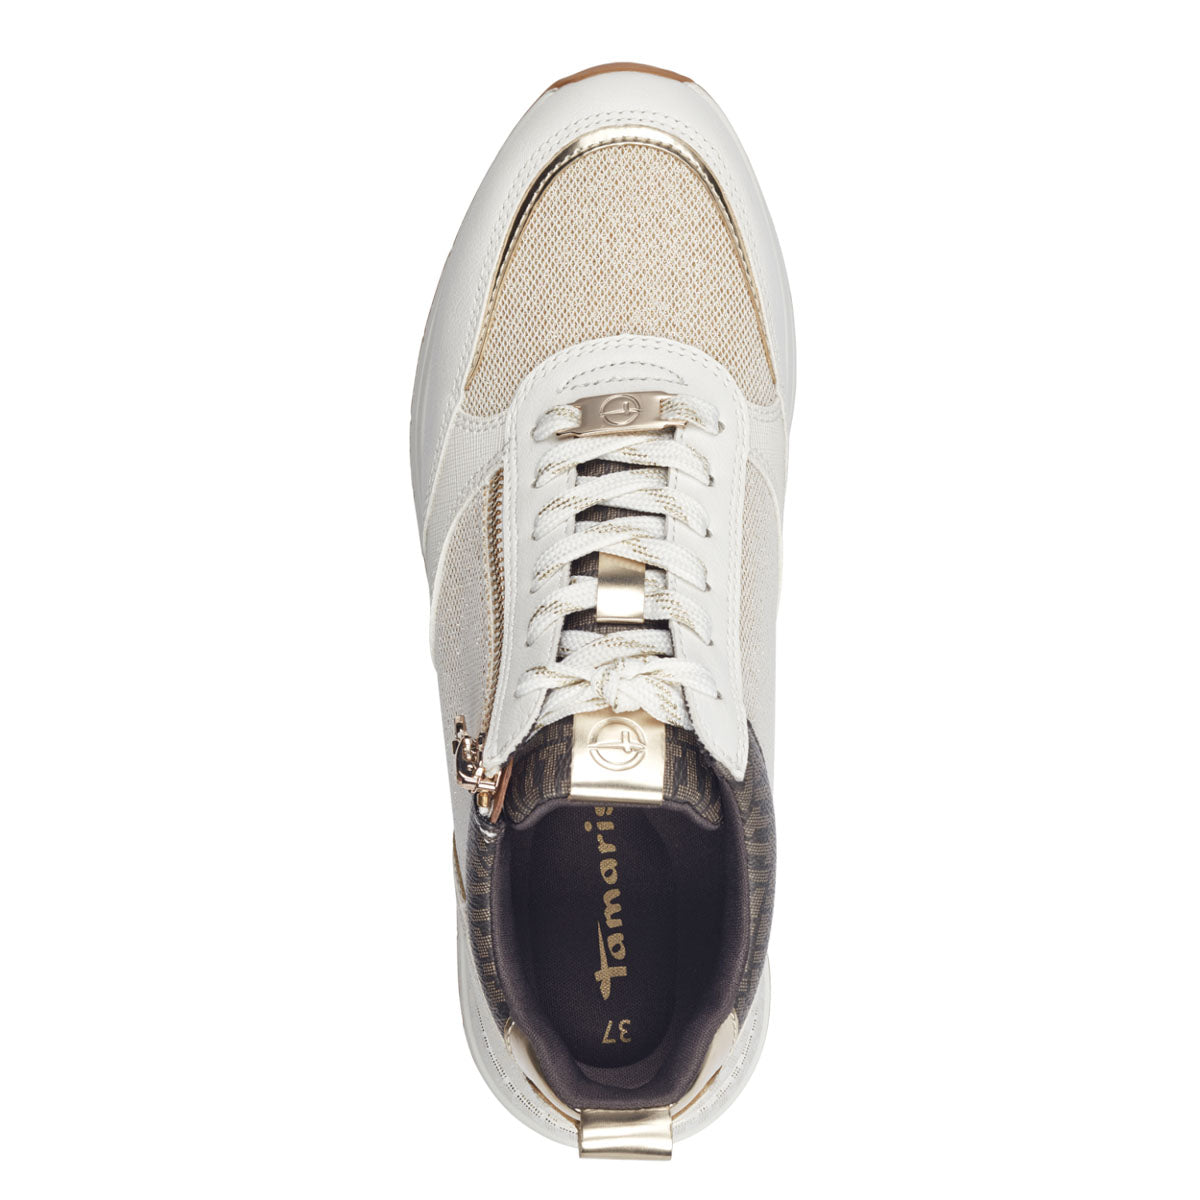 Tamaris White Runner with Gold and Brown Details